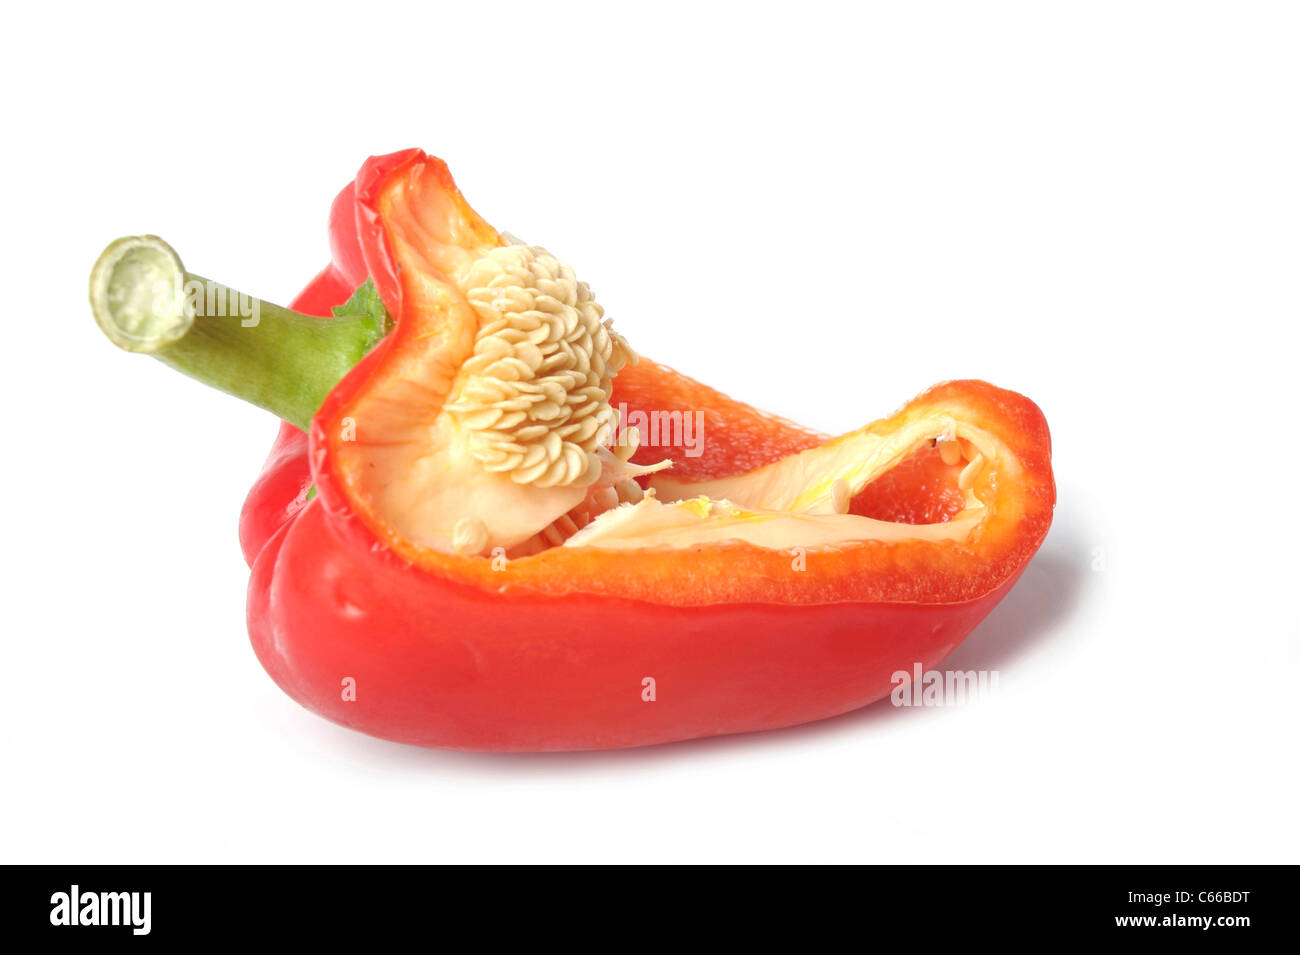 half a red pepper isolated on white background Stock Photo